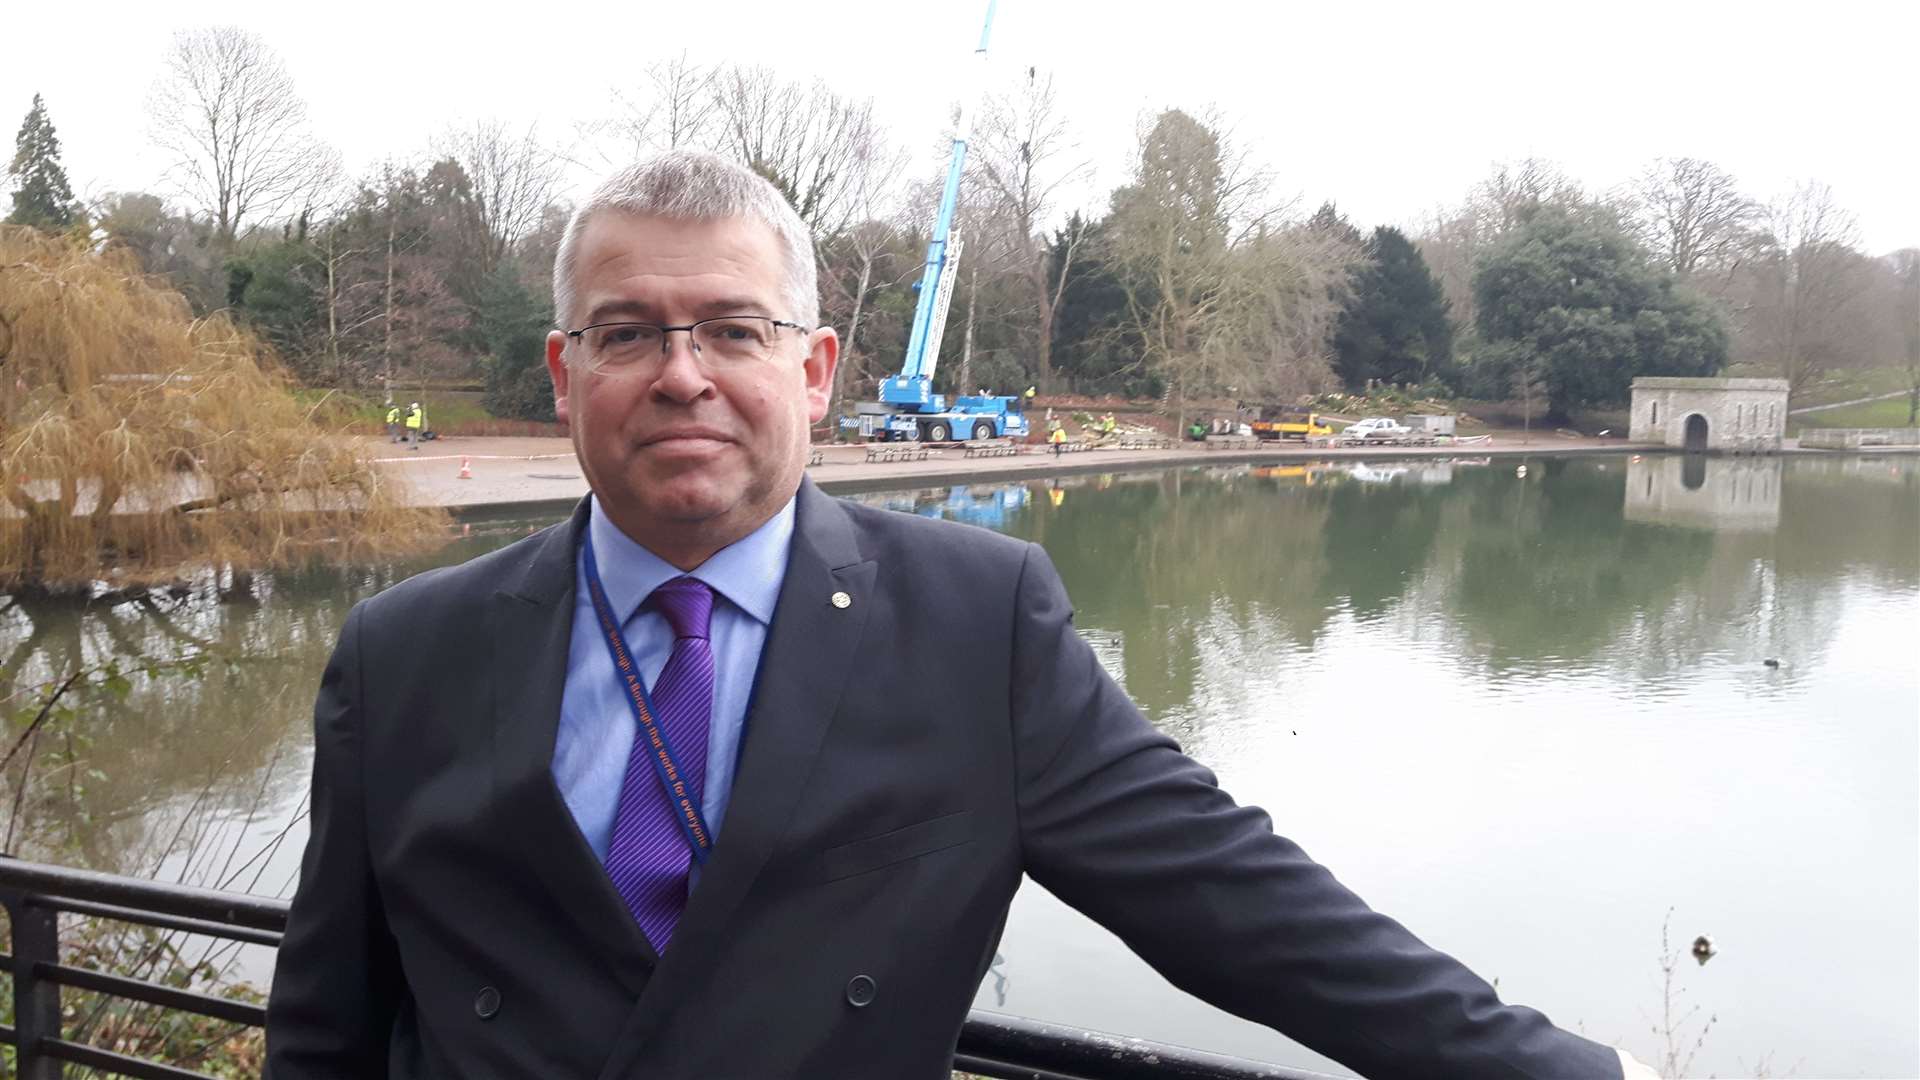 Cllr Martin Cox has lived in Maidstone for 45 years